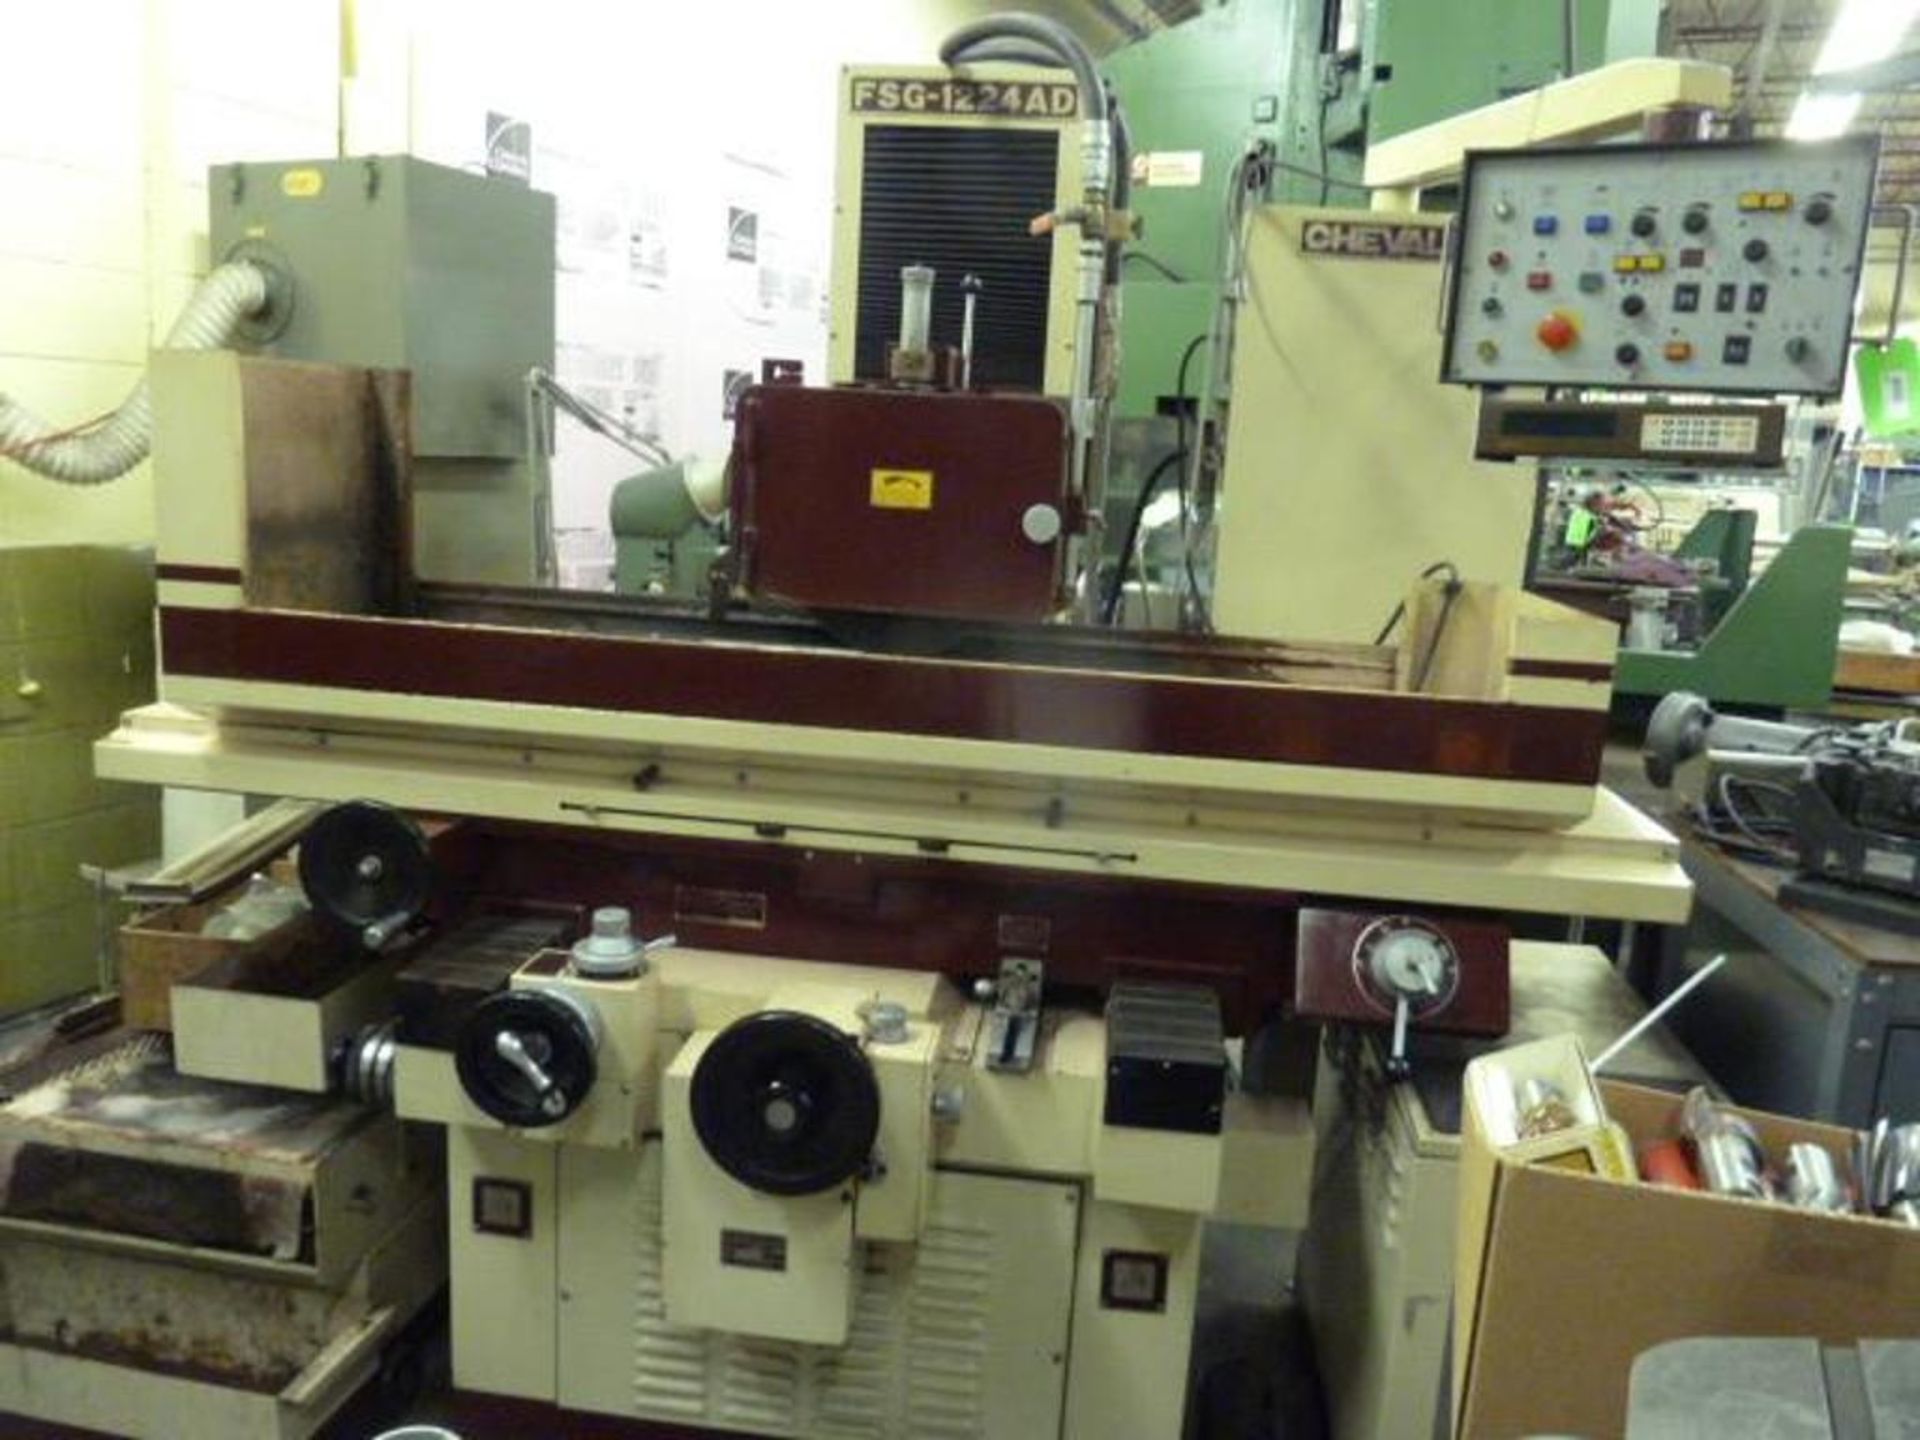 Chevalier Model 1224AD Hydraulic Surface Grinder, 12" x 24" Fine Line Electro-Magnetic Chu - Image 12 of 12